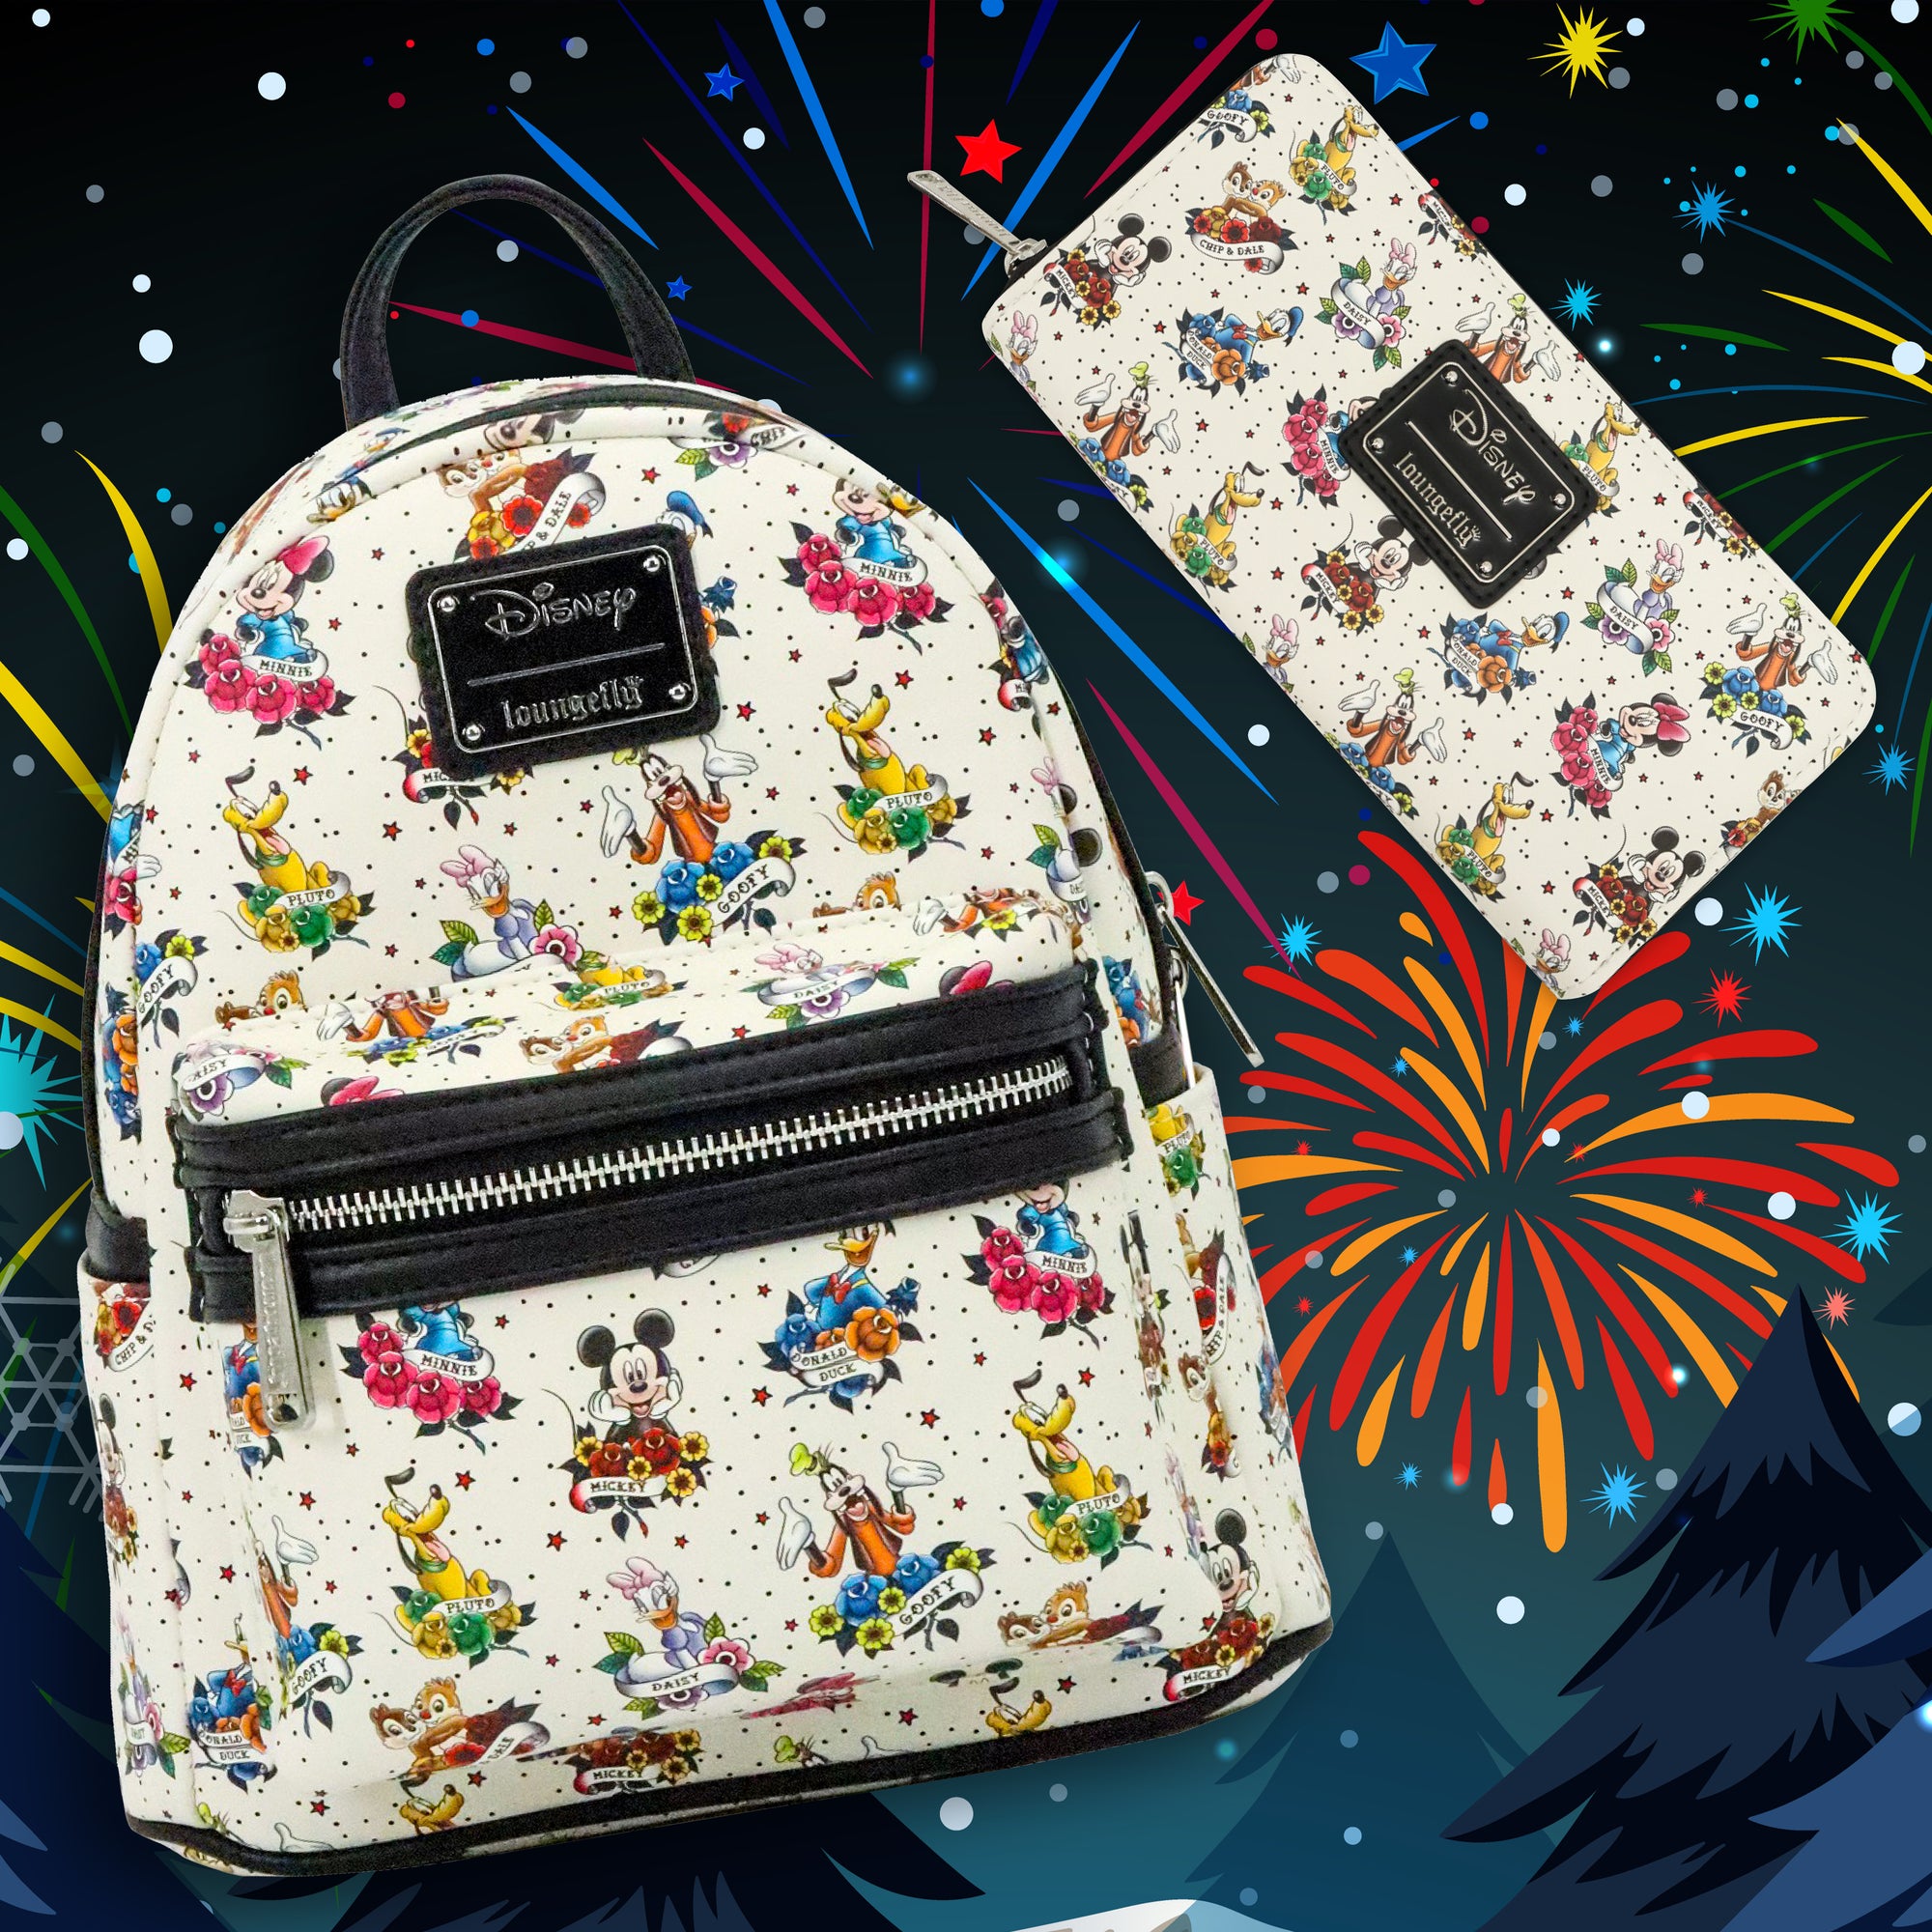 New! Pokemon Loungefly Mini Backpack for Sale in Portland, OR